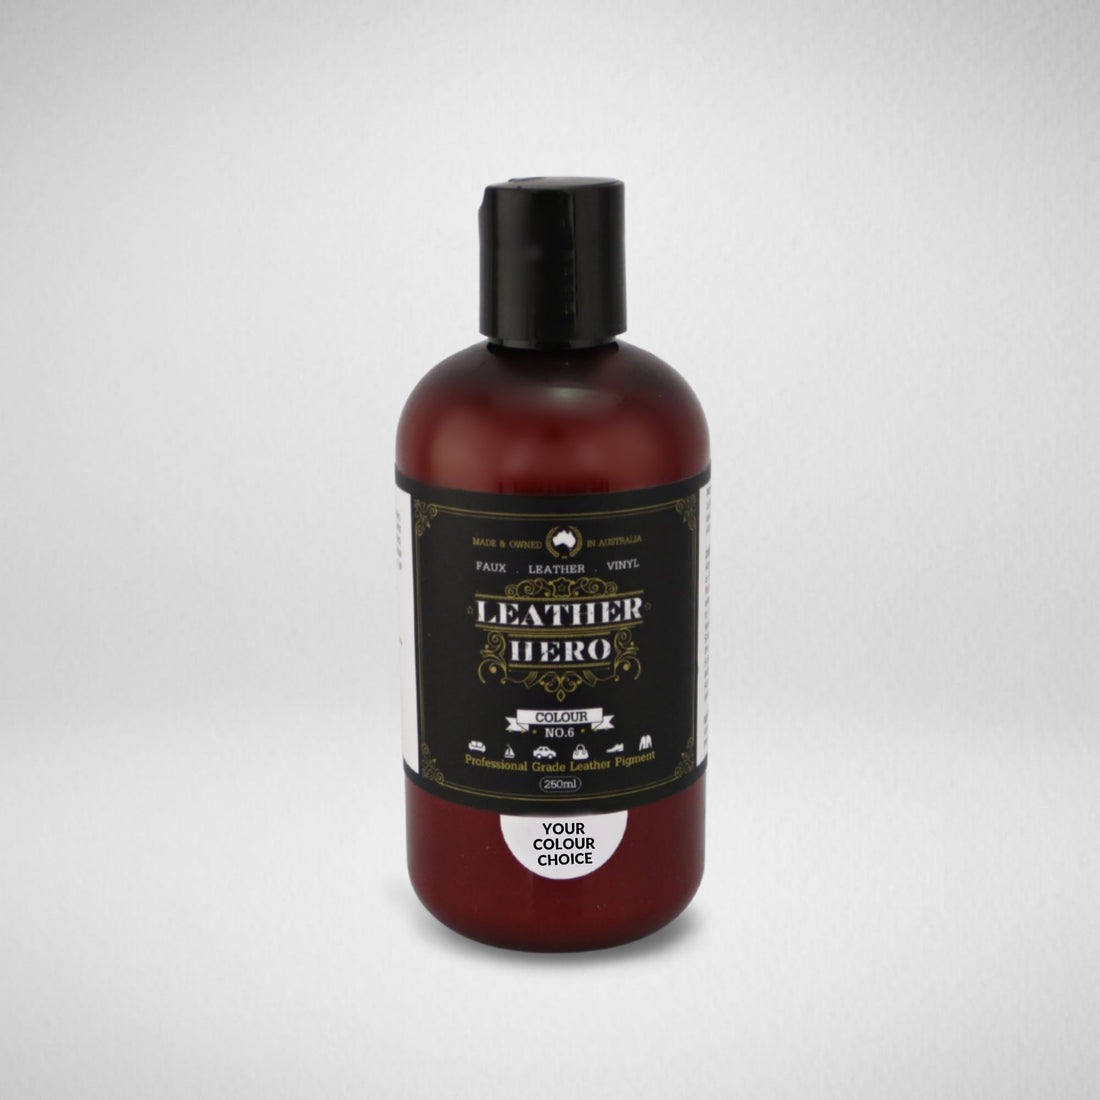 Leather Paint - Regency Leather Repair & Recolouring Leather Hero Australia